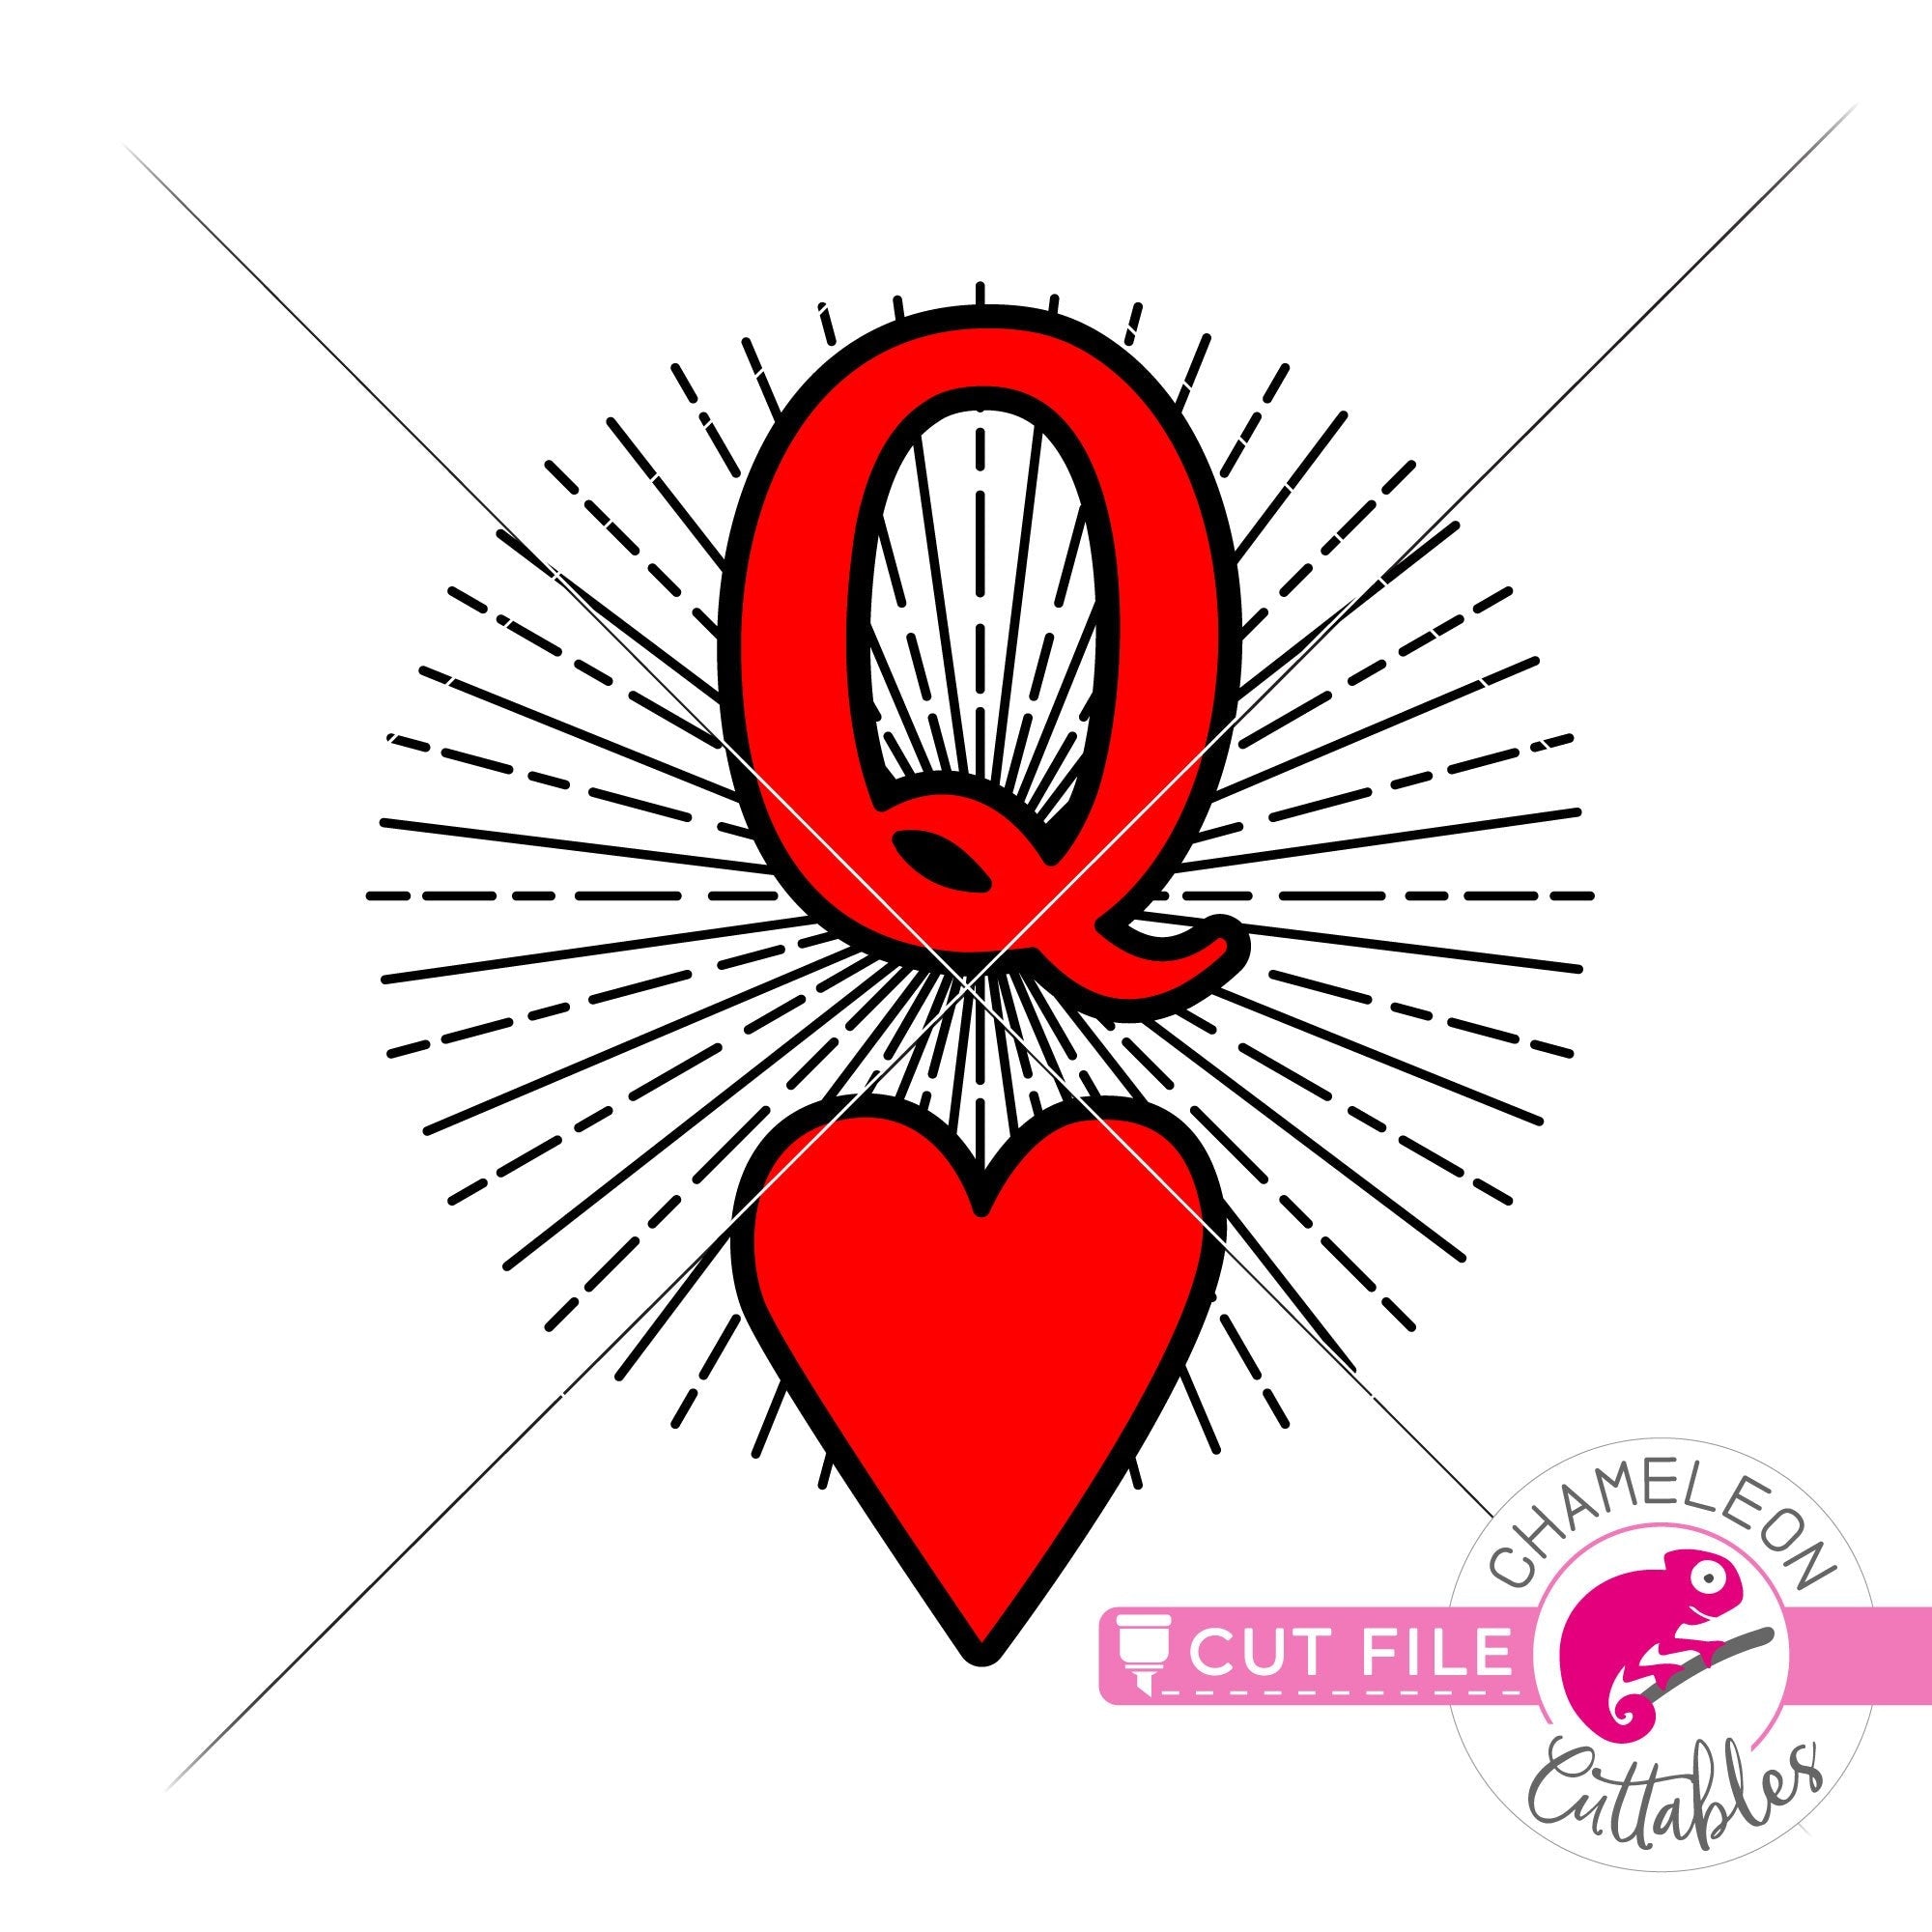 Download Queen Of Hearts Card Rays Valentine S Day Svg Png Dxf Eps Jpeg Chameleon Cuttables Llc Chameleon Cuttables Llc